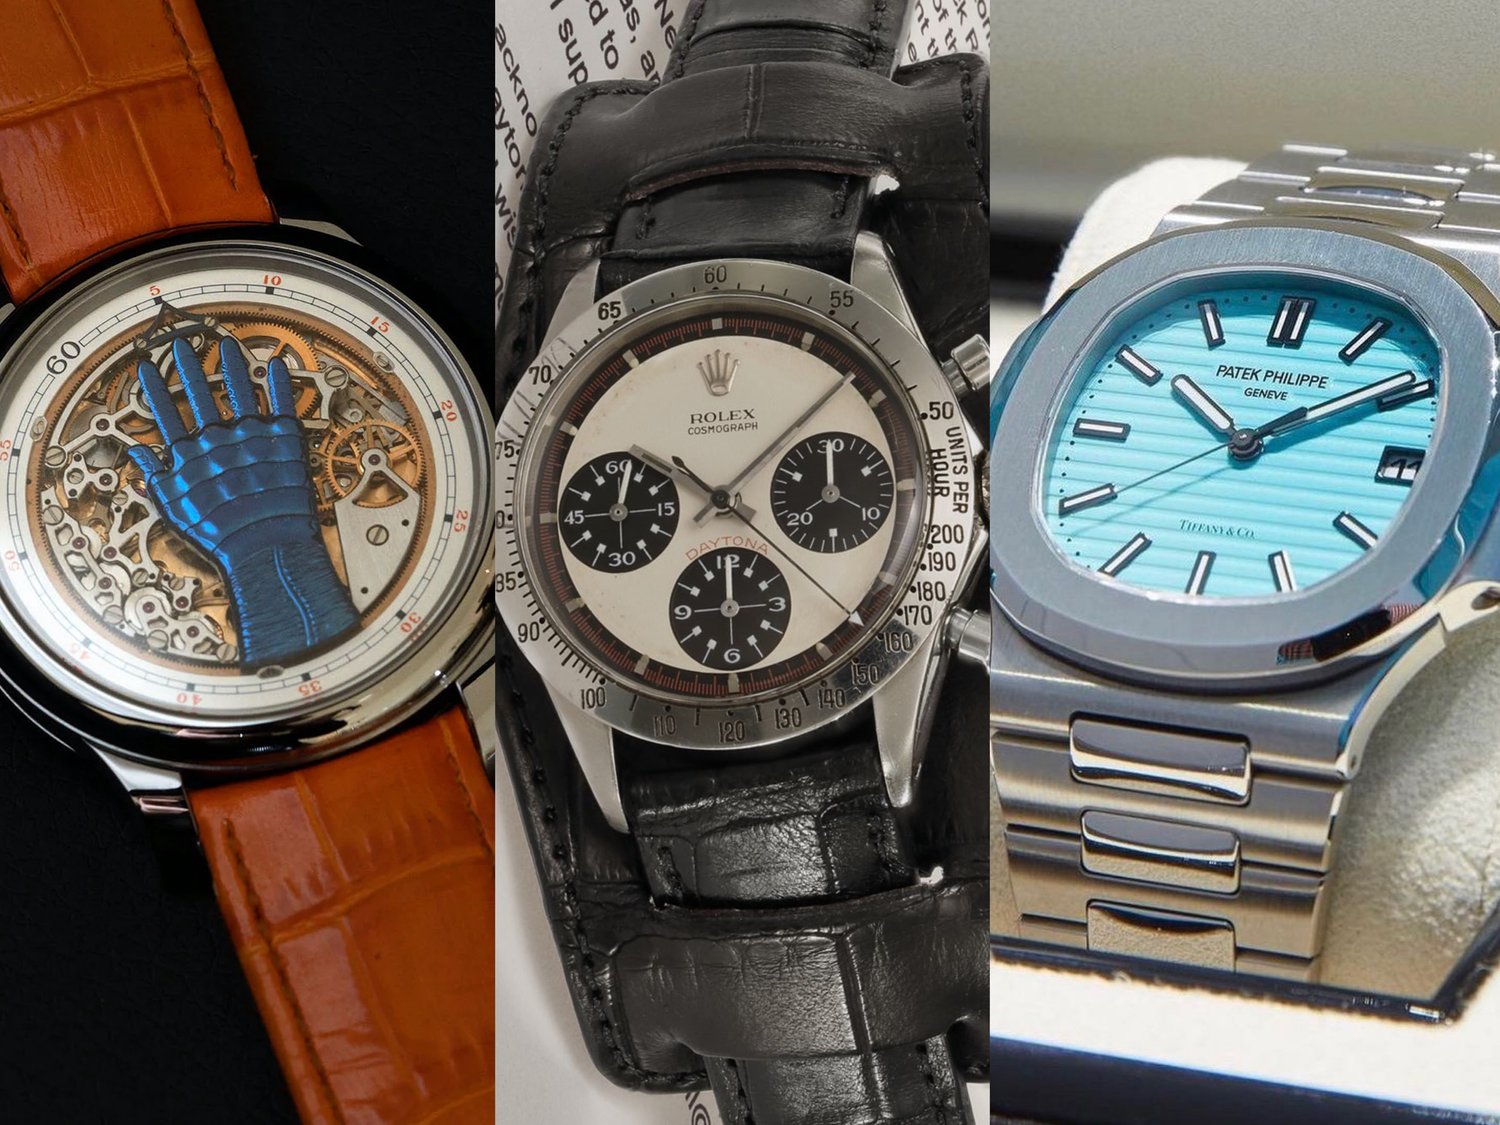 The 9 Most Expensive Watches Sold at Auction